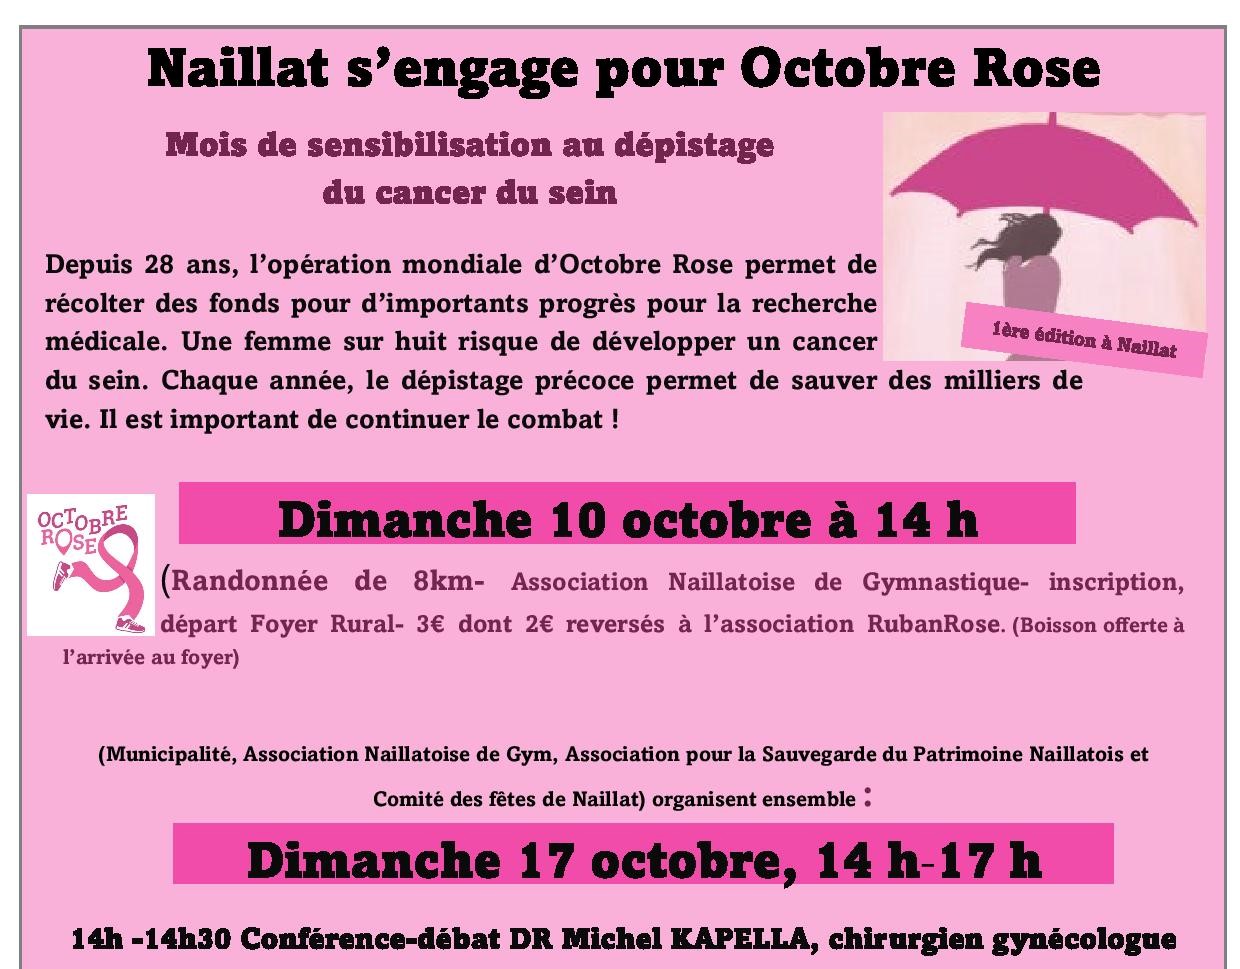 Naillat s’engage pour Octobre Rose